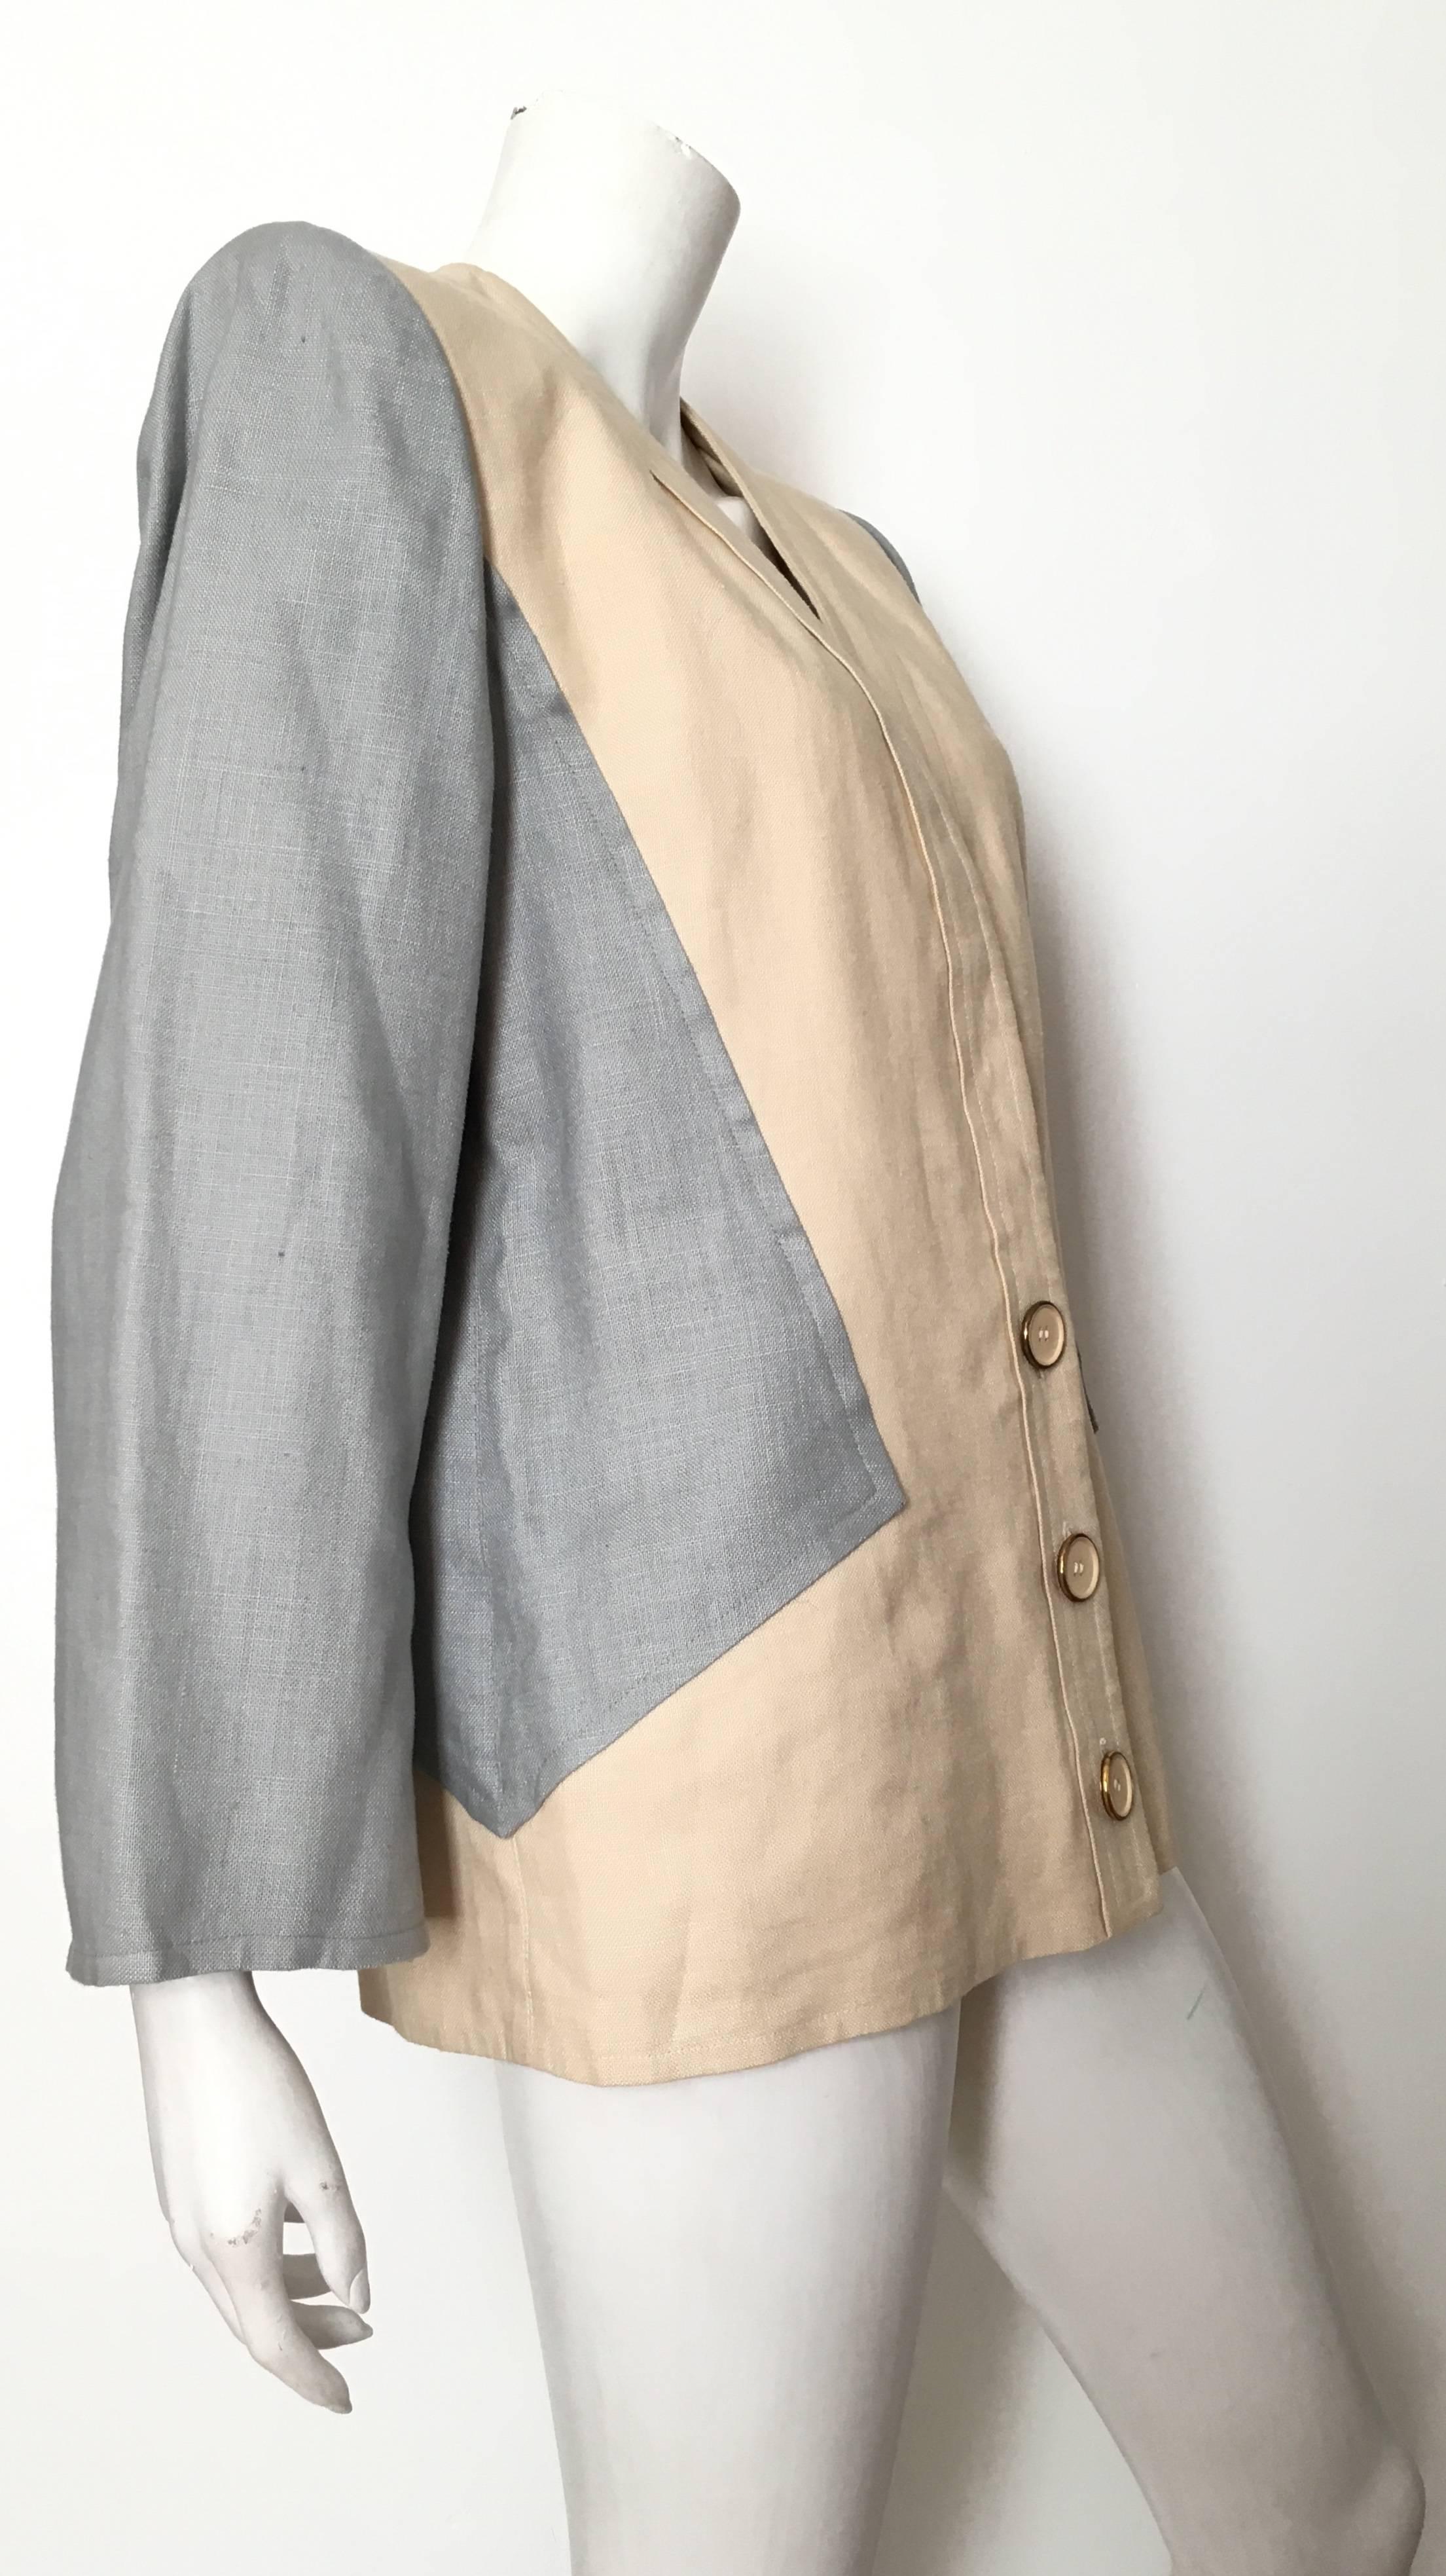 Jacqueline de Ribes 1980s cream & light blue grey linen jacket is a size large and will fit an USA size 8 / 10. The design of this jacket is supposed to be boxy and oversized, casual elegance.  Jacket is not lined. Jacket has pleats on the backside